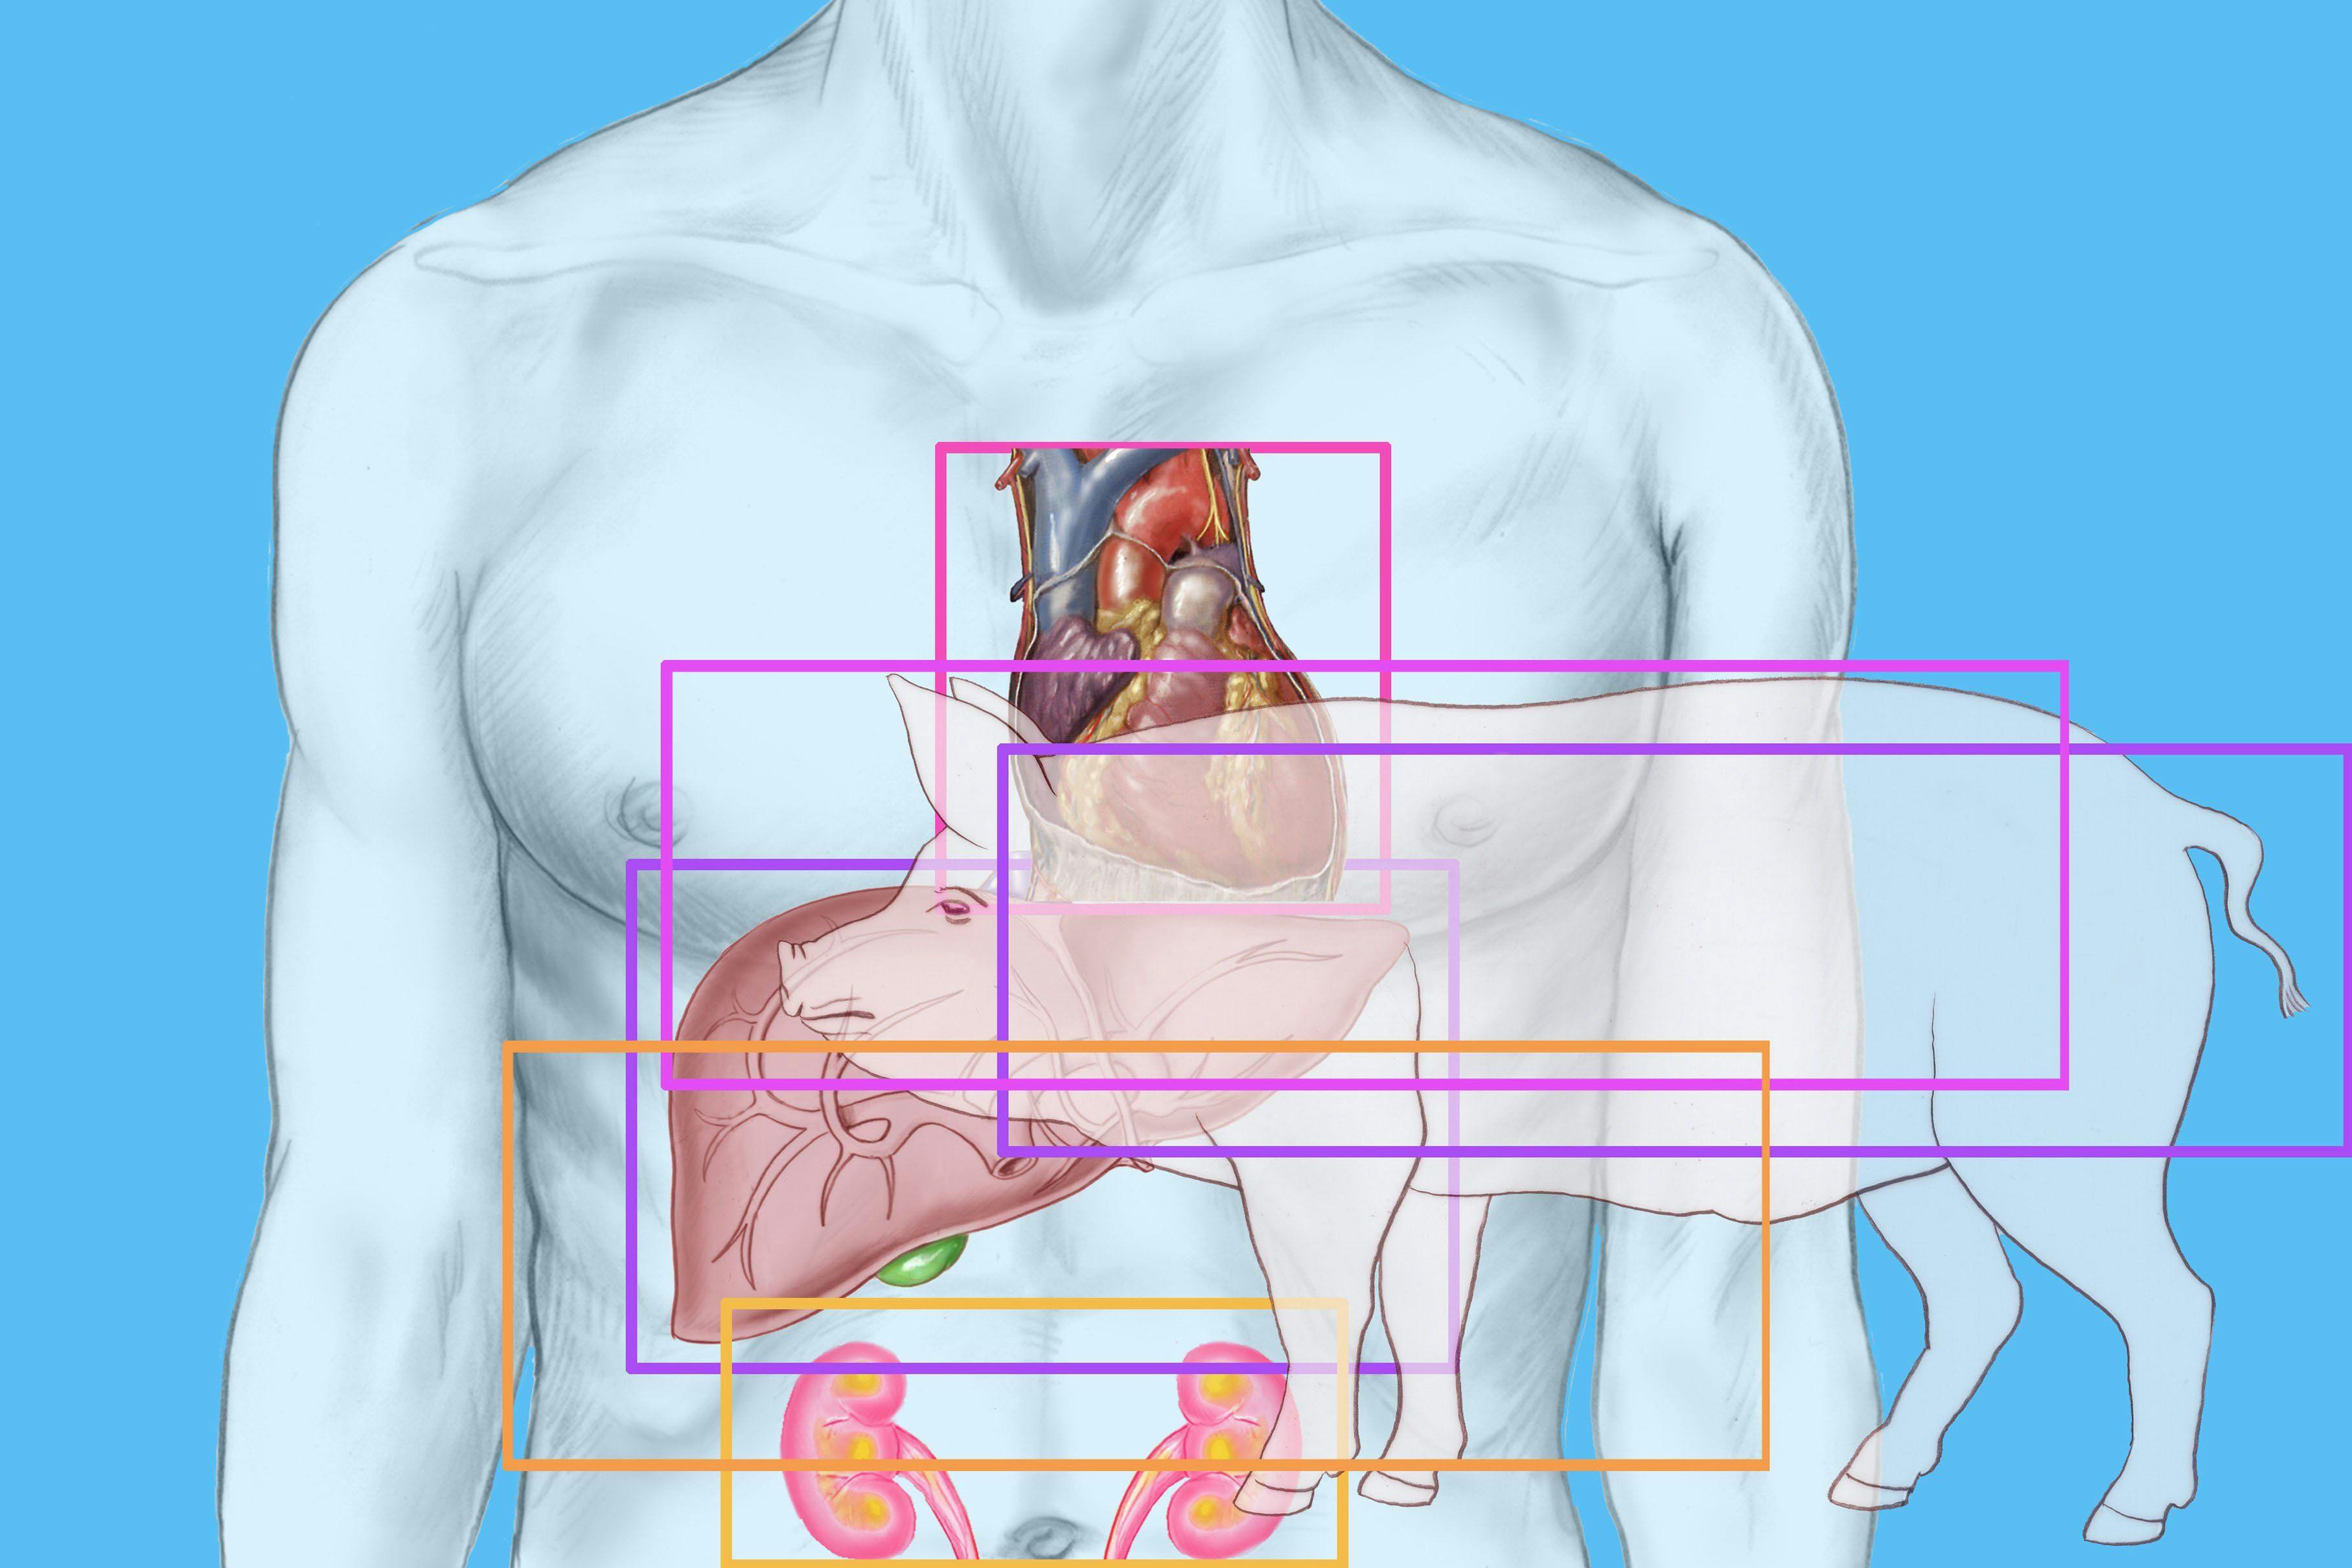 An illustration showing a human torso and a pig to reference xenotransplantation.